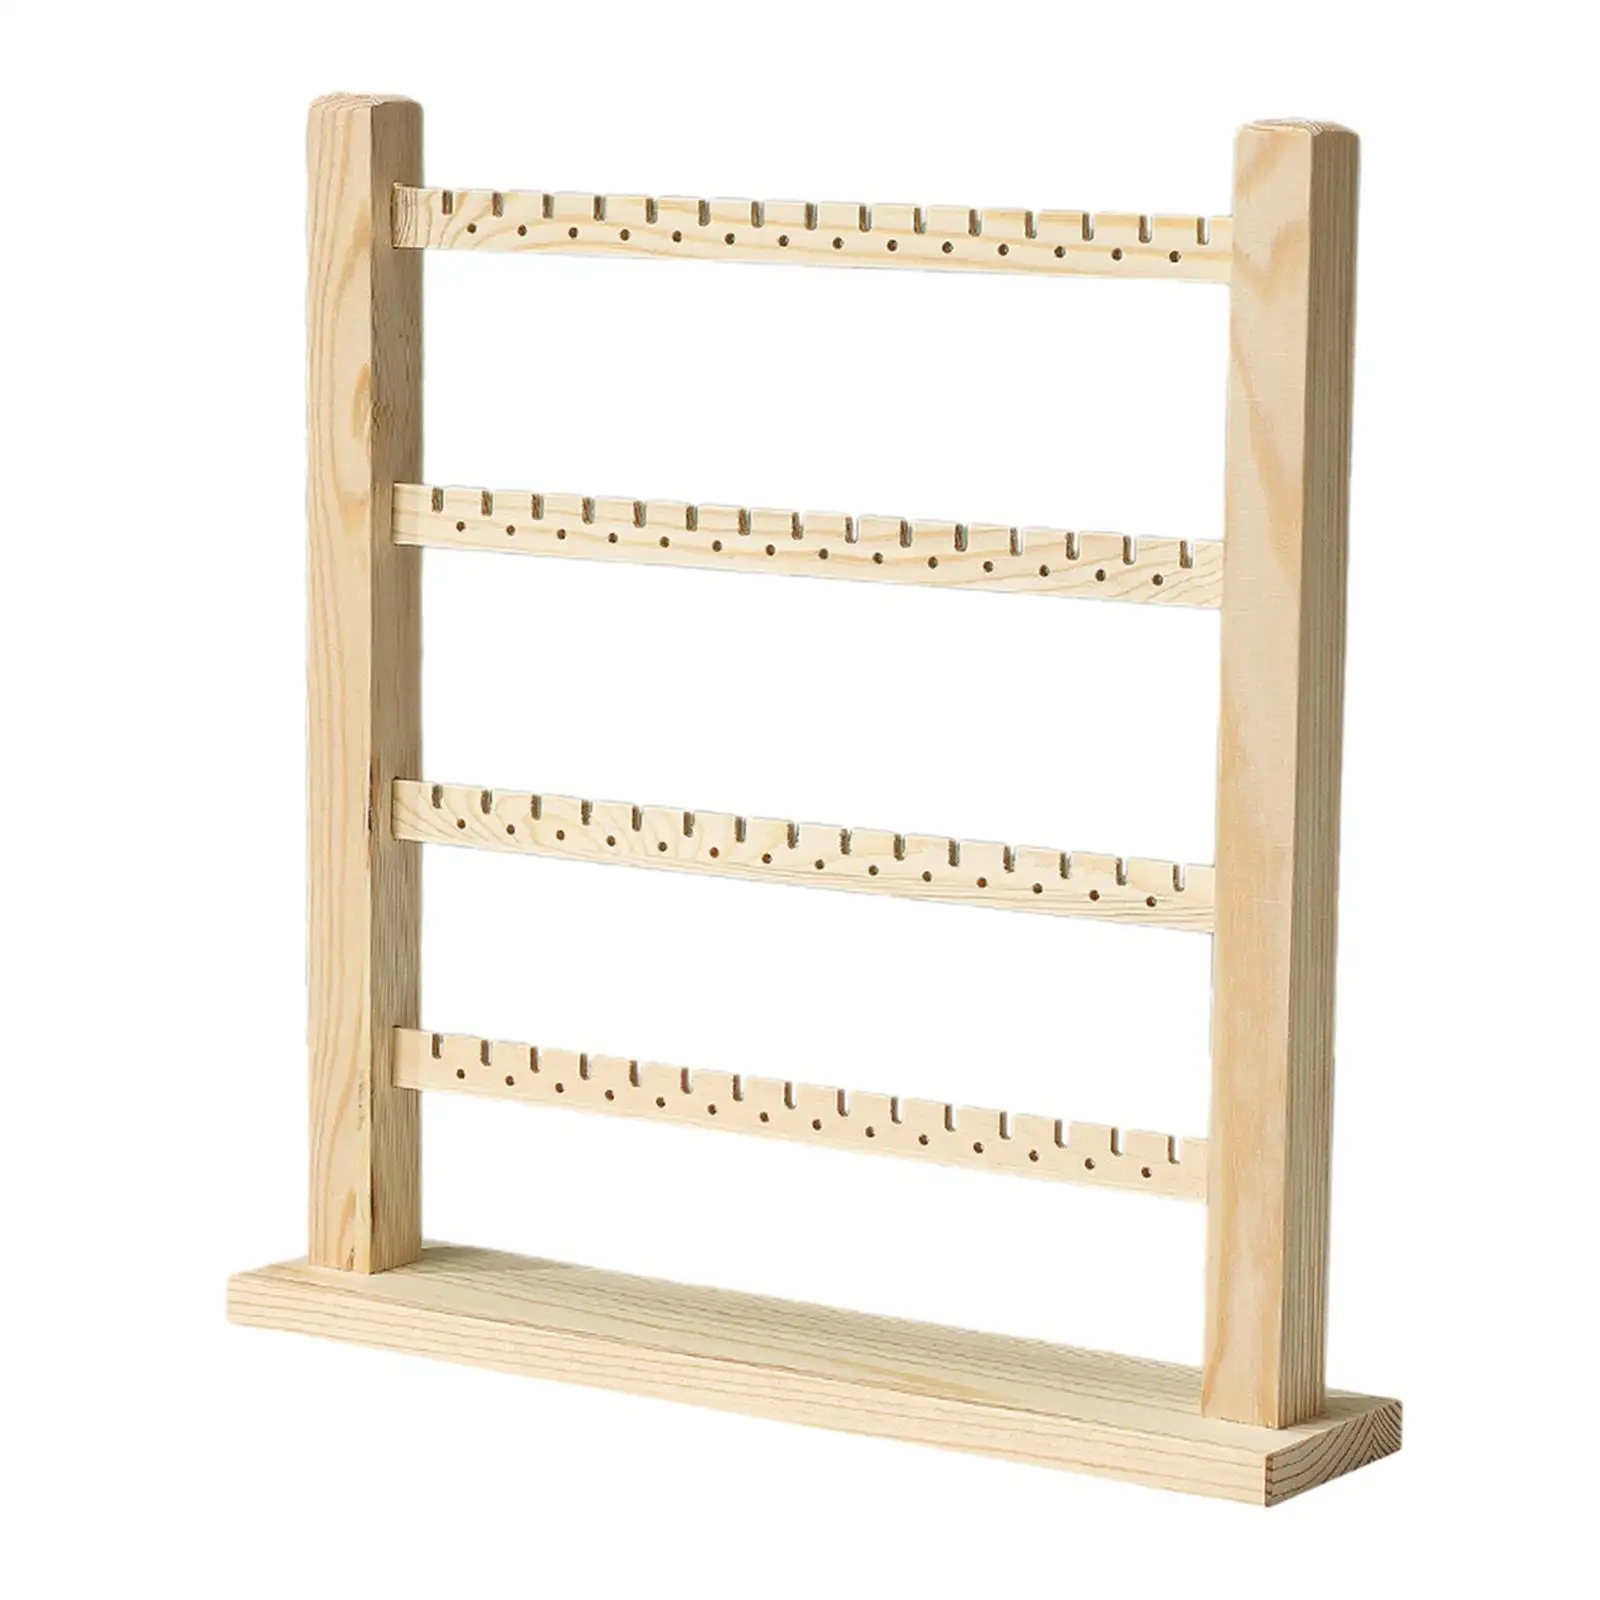 Jewelry Display Stand Earring Holder, Wood Earring Display Rack Jewelry Organizer with Holes, Desktop Ear Studs Holder